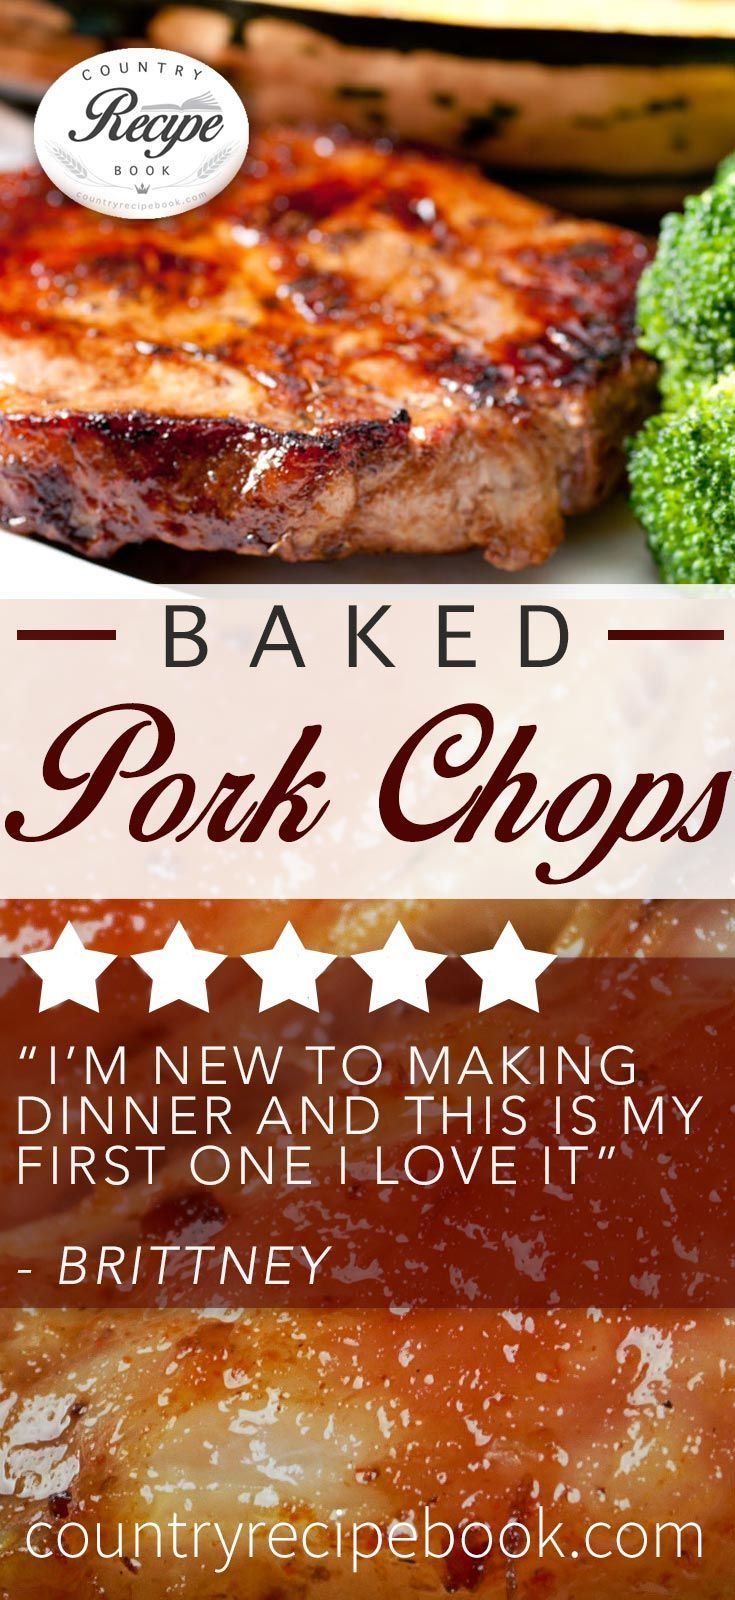 Delicious Baked Pork Chops Recipe. Perfect combination of Country style flavours with amazing results. Click to view recipe